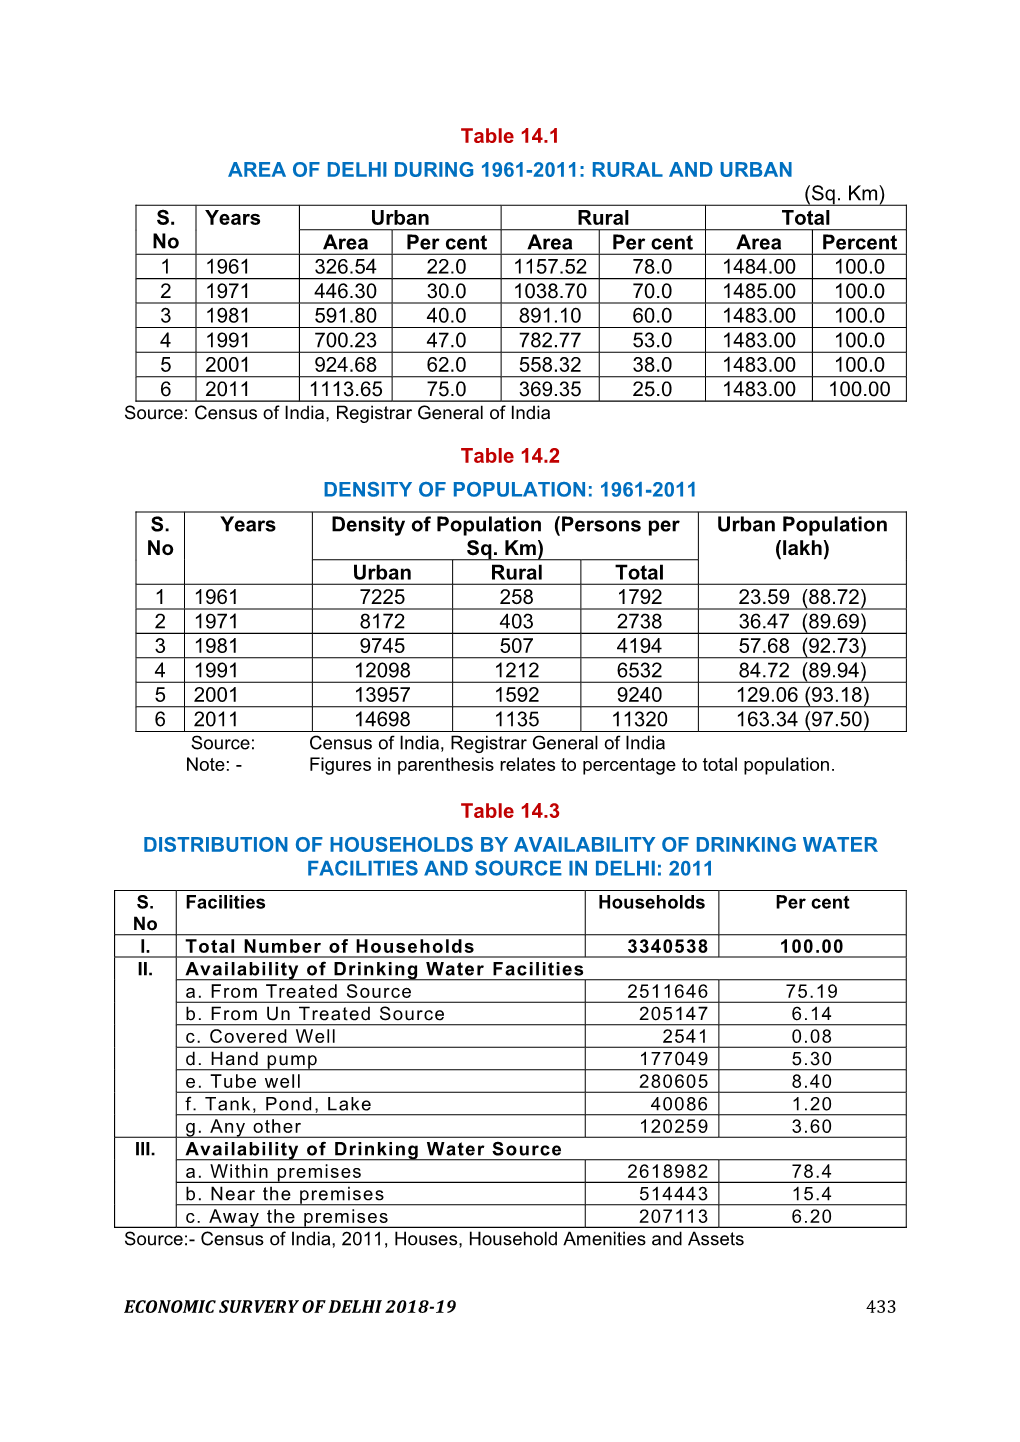 Table 14.1 AREA of DELHI DURING 1961-2011: RURAL and URBAN (Sq